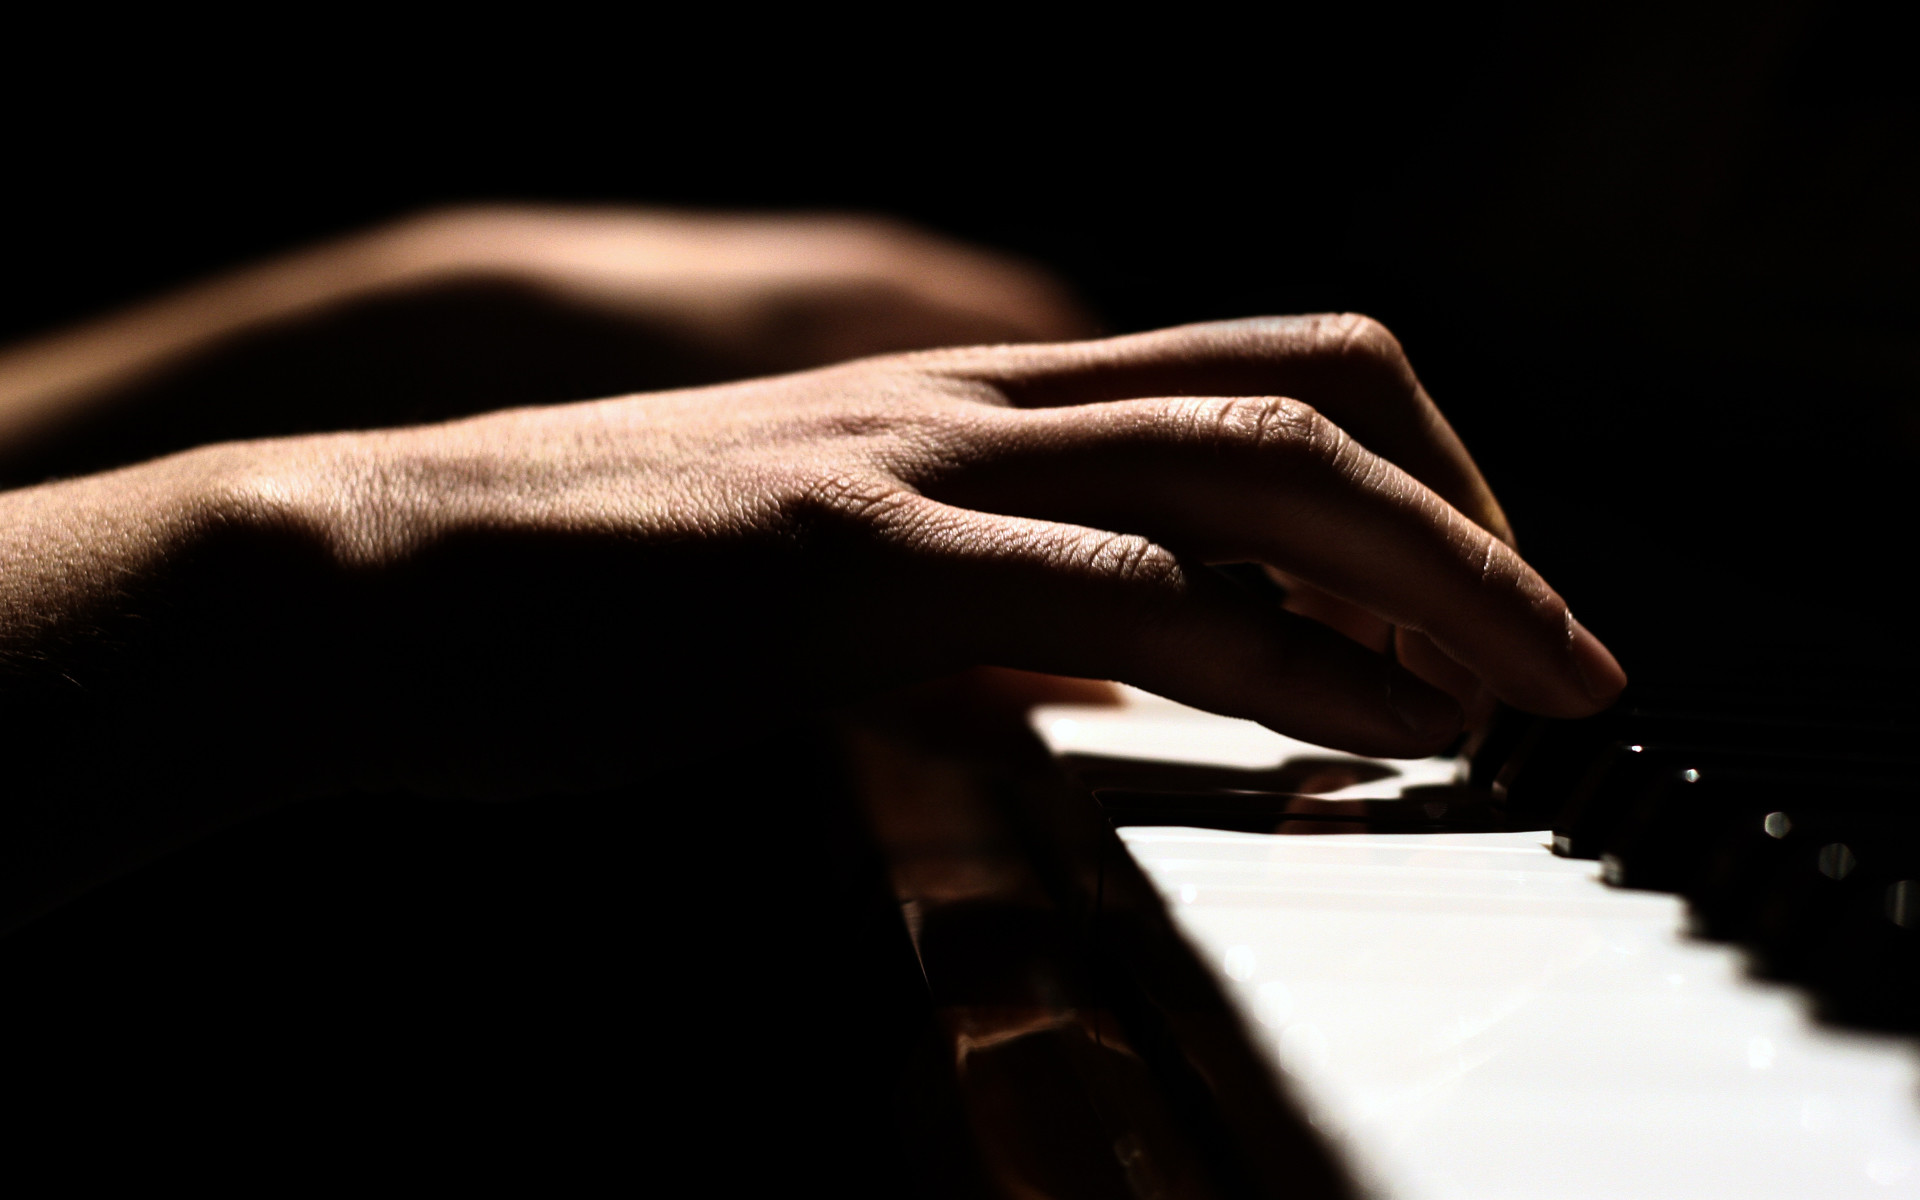 Hands Playing Piano